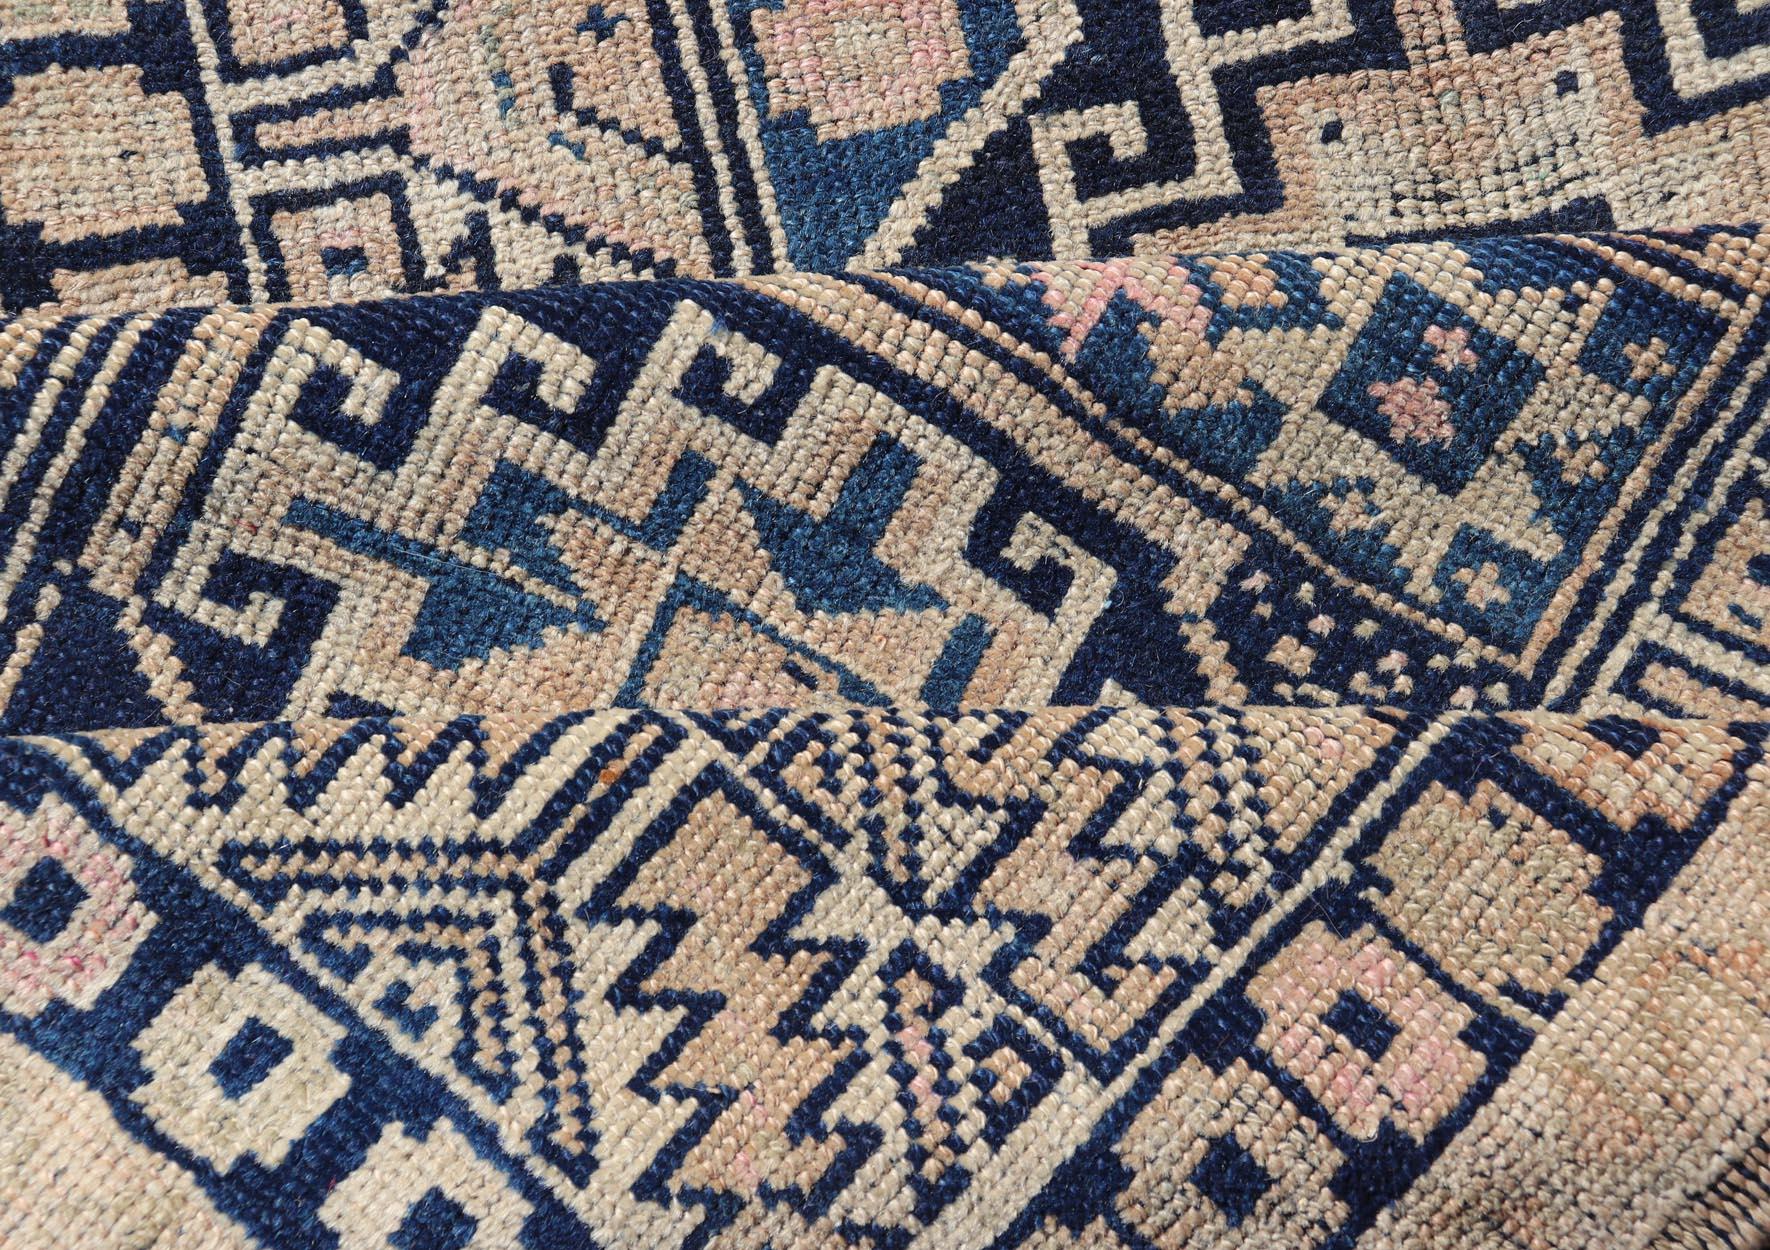 Vintage Oushak Turkish Runner with Geometric Design in Blues, Taupe, and Cream For Sale 5